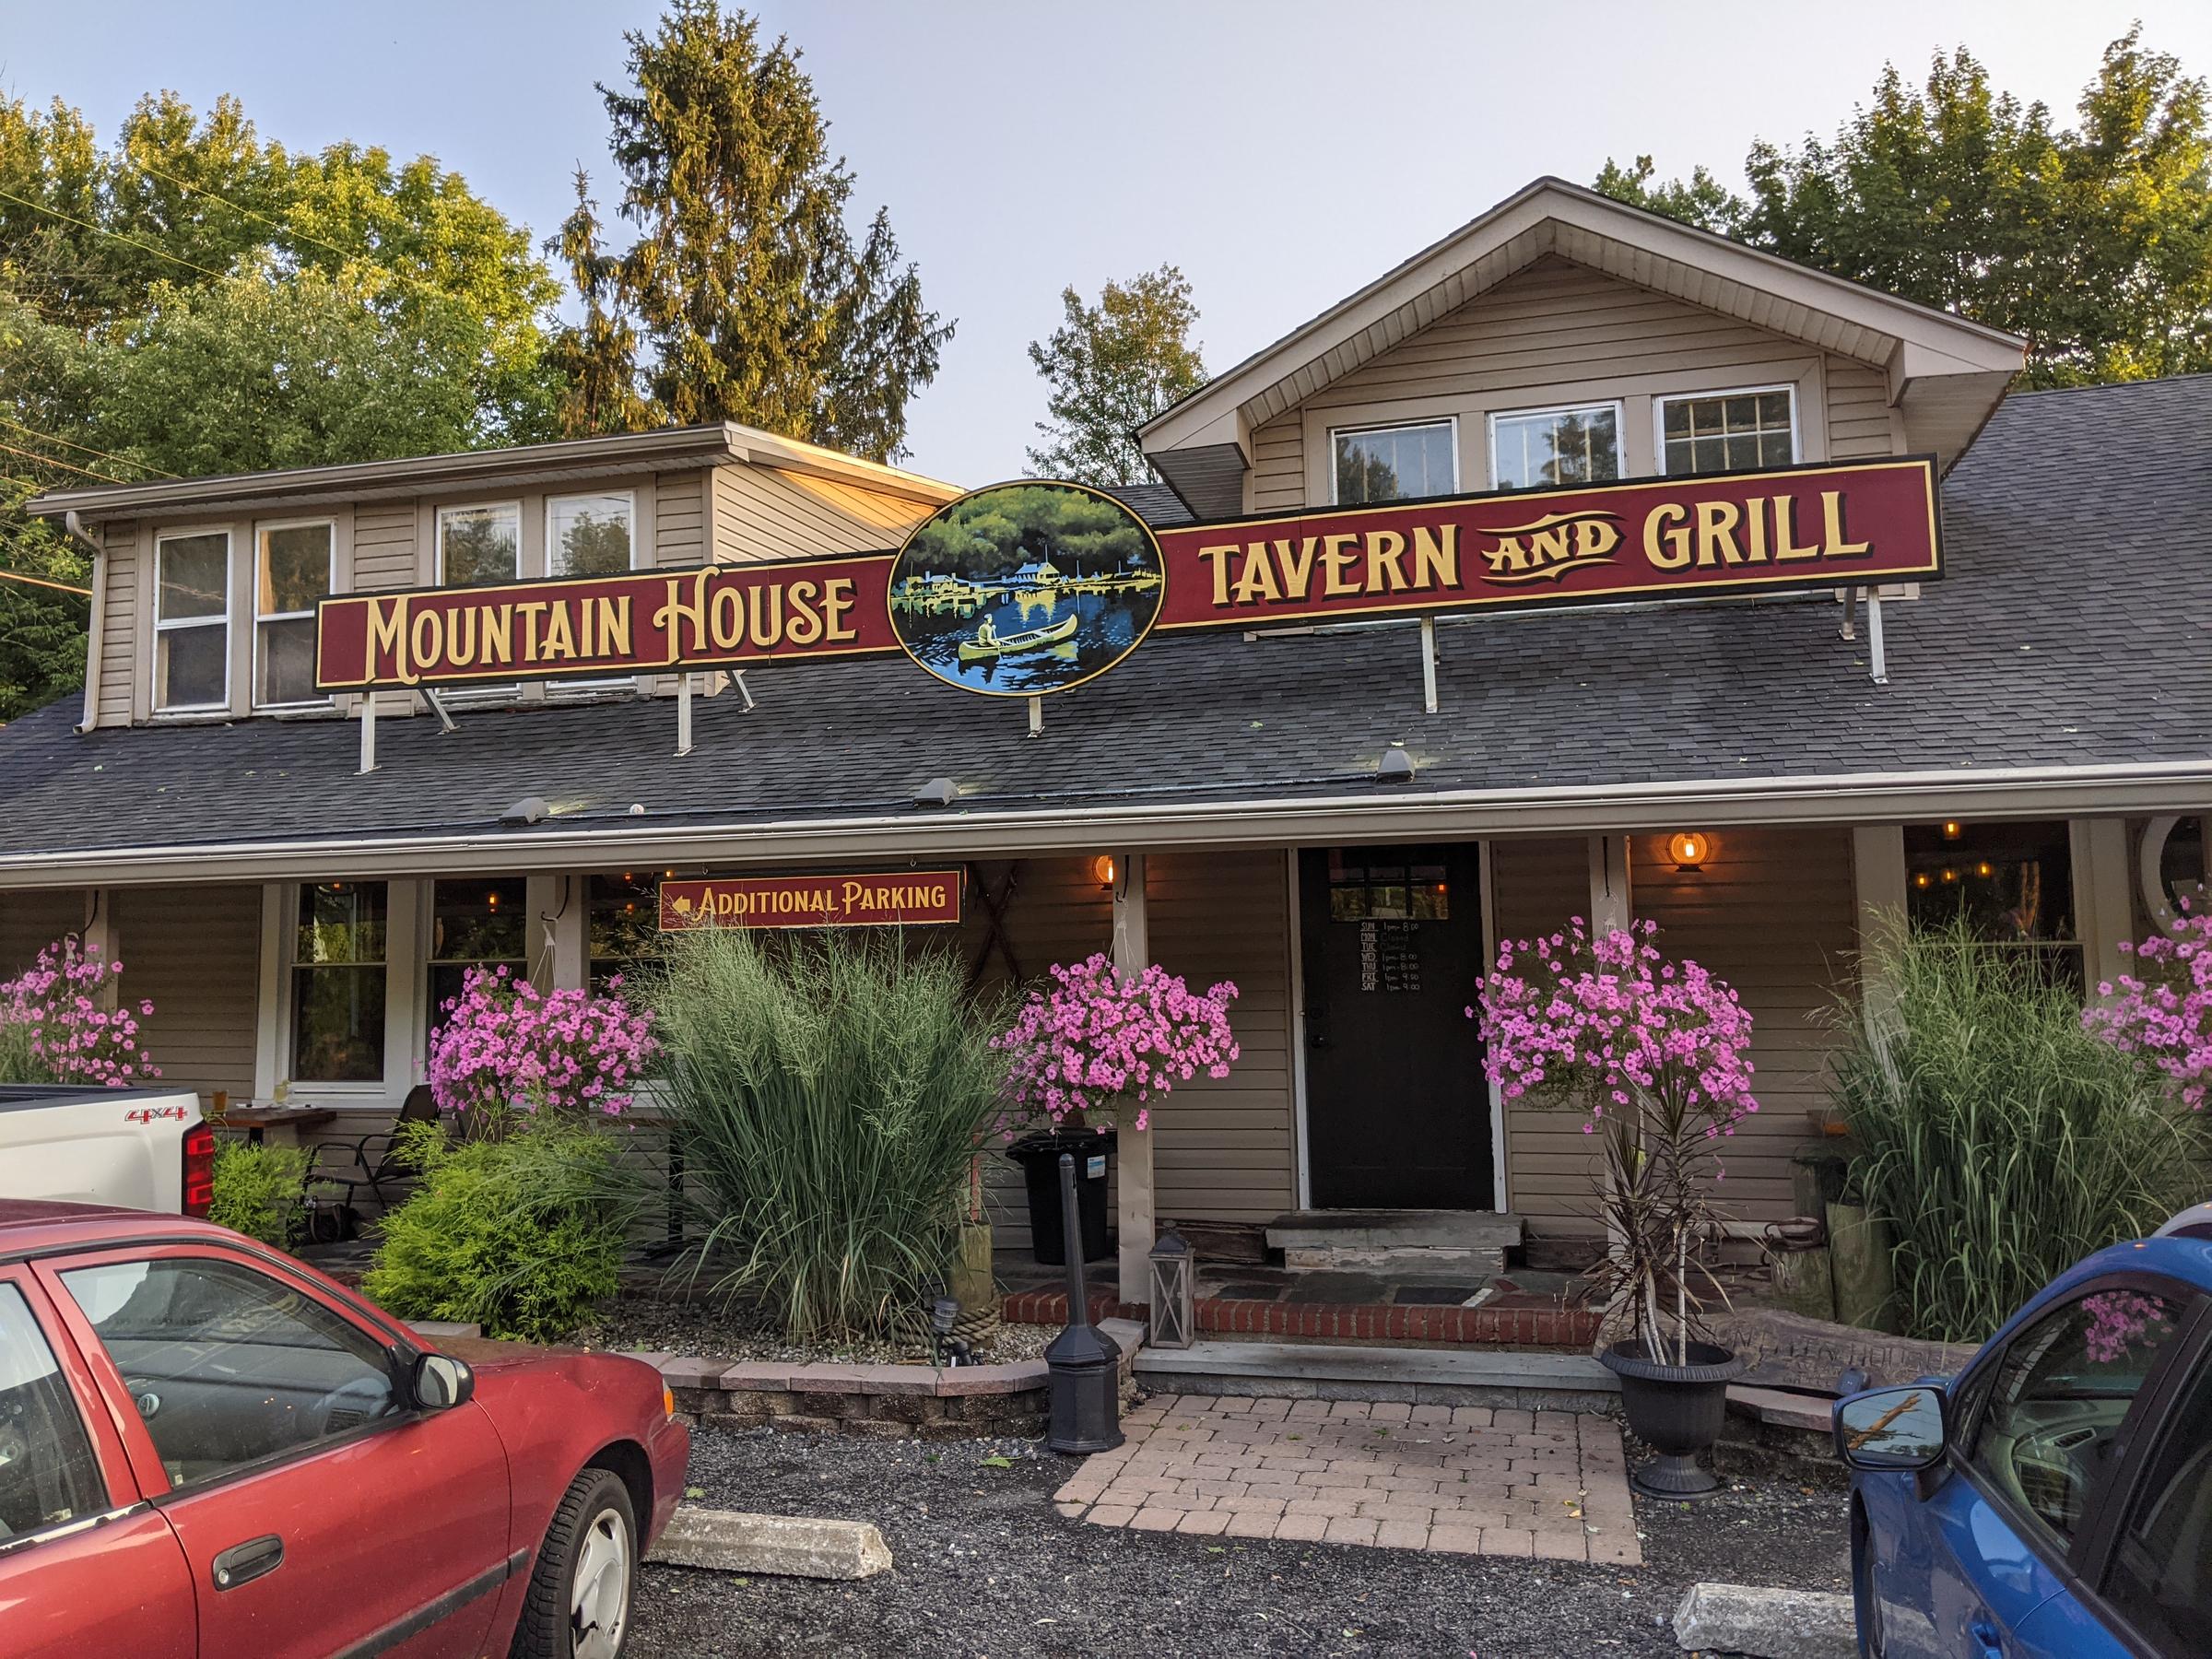 Pet Friendly Mountain House Tavern and Grill